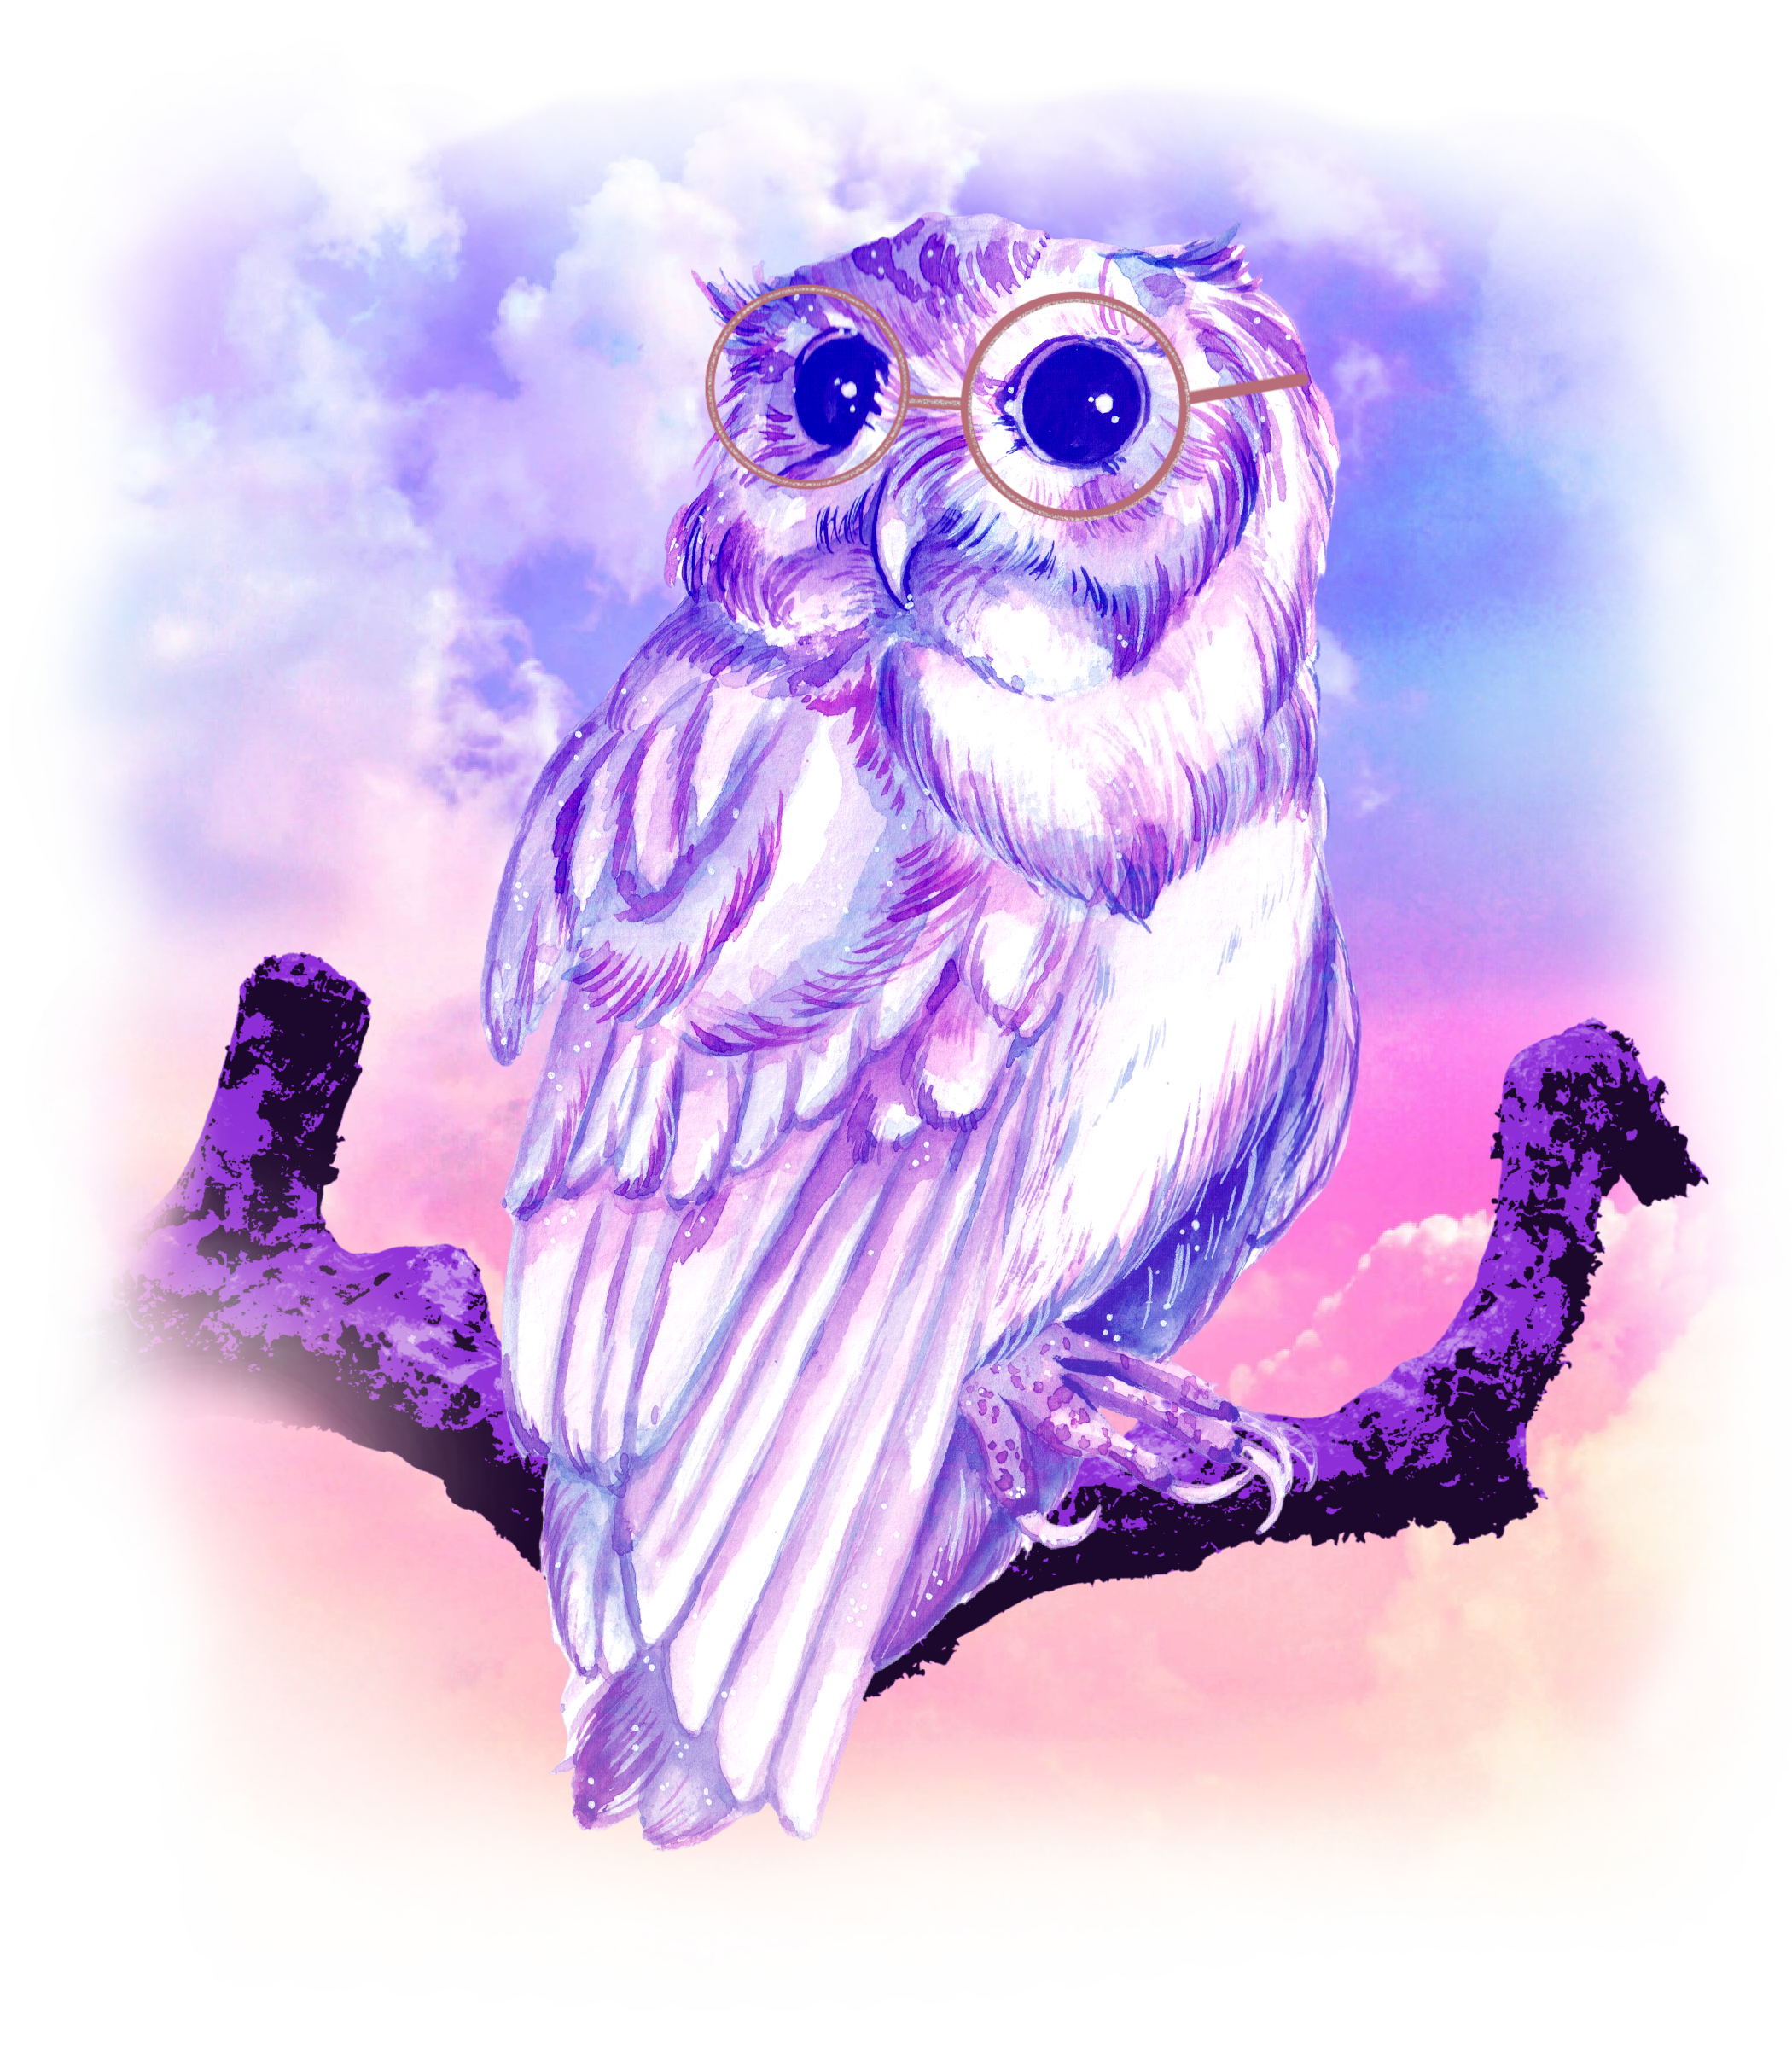 63-daydream-owl.png